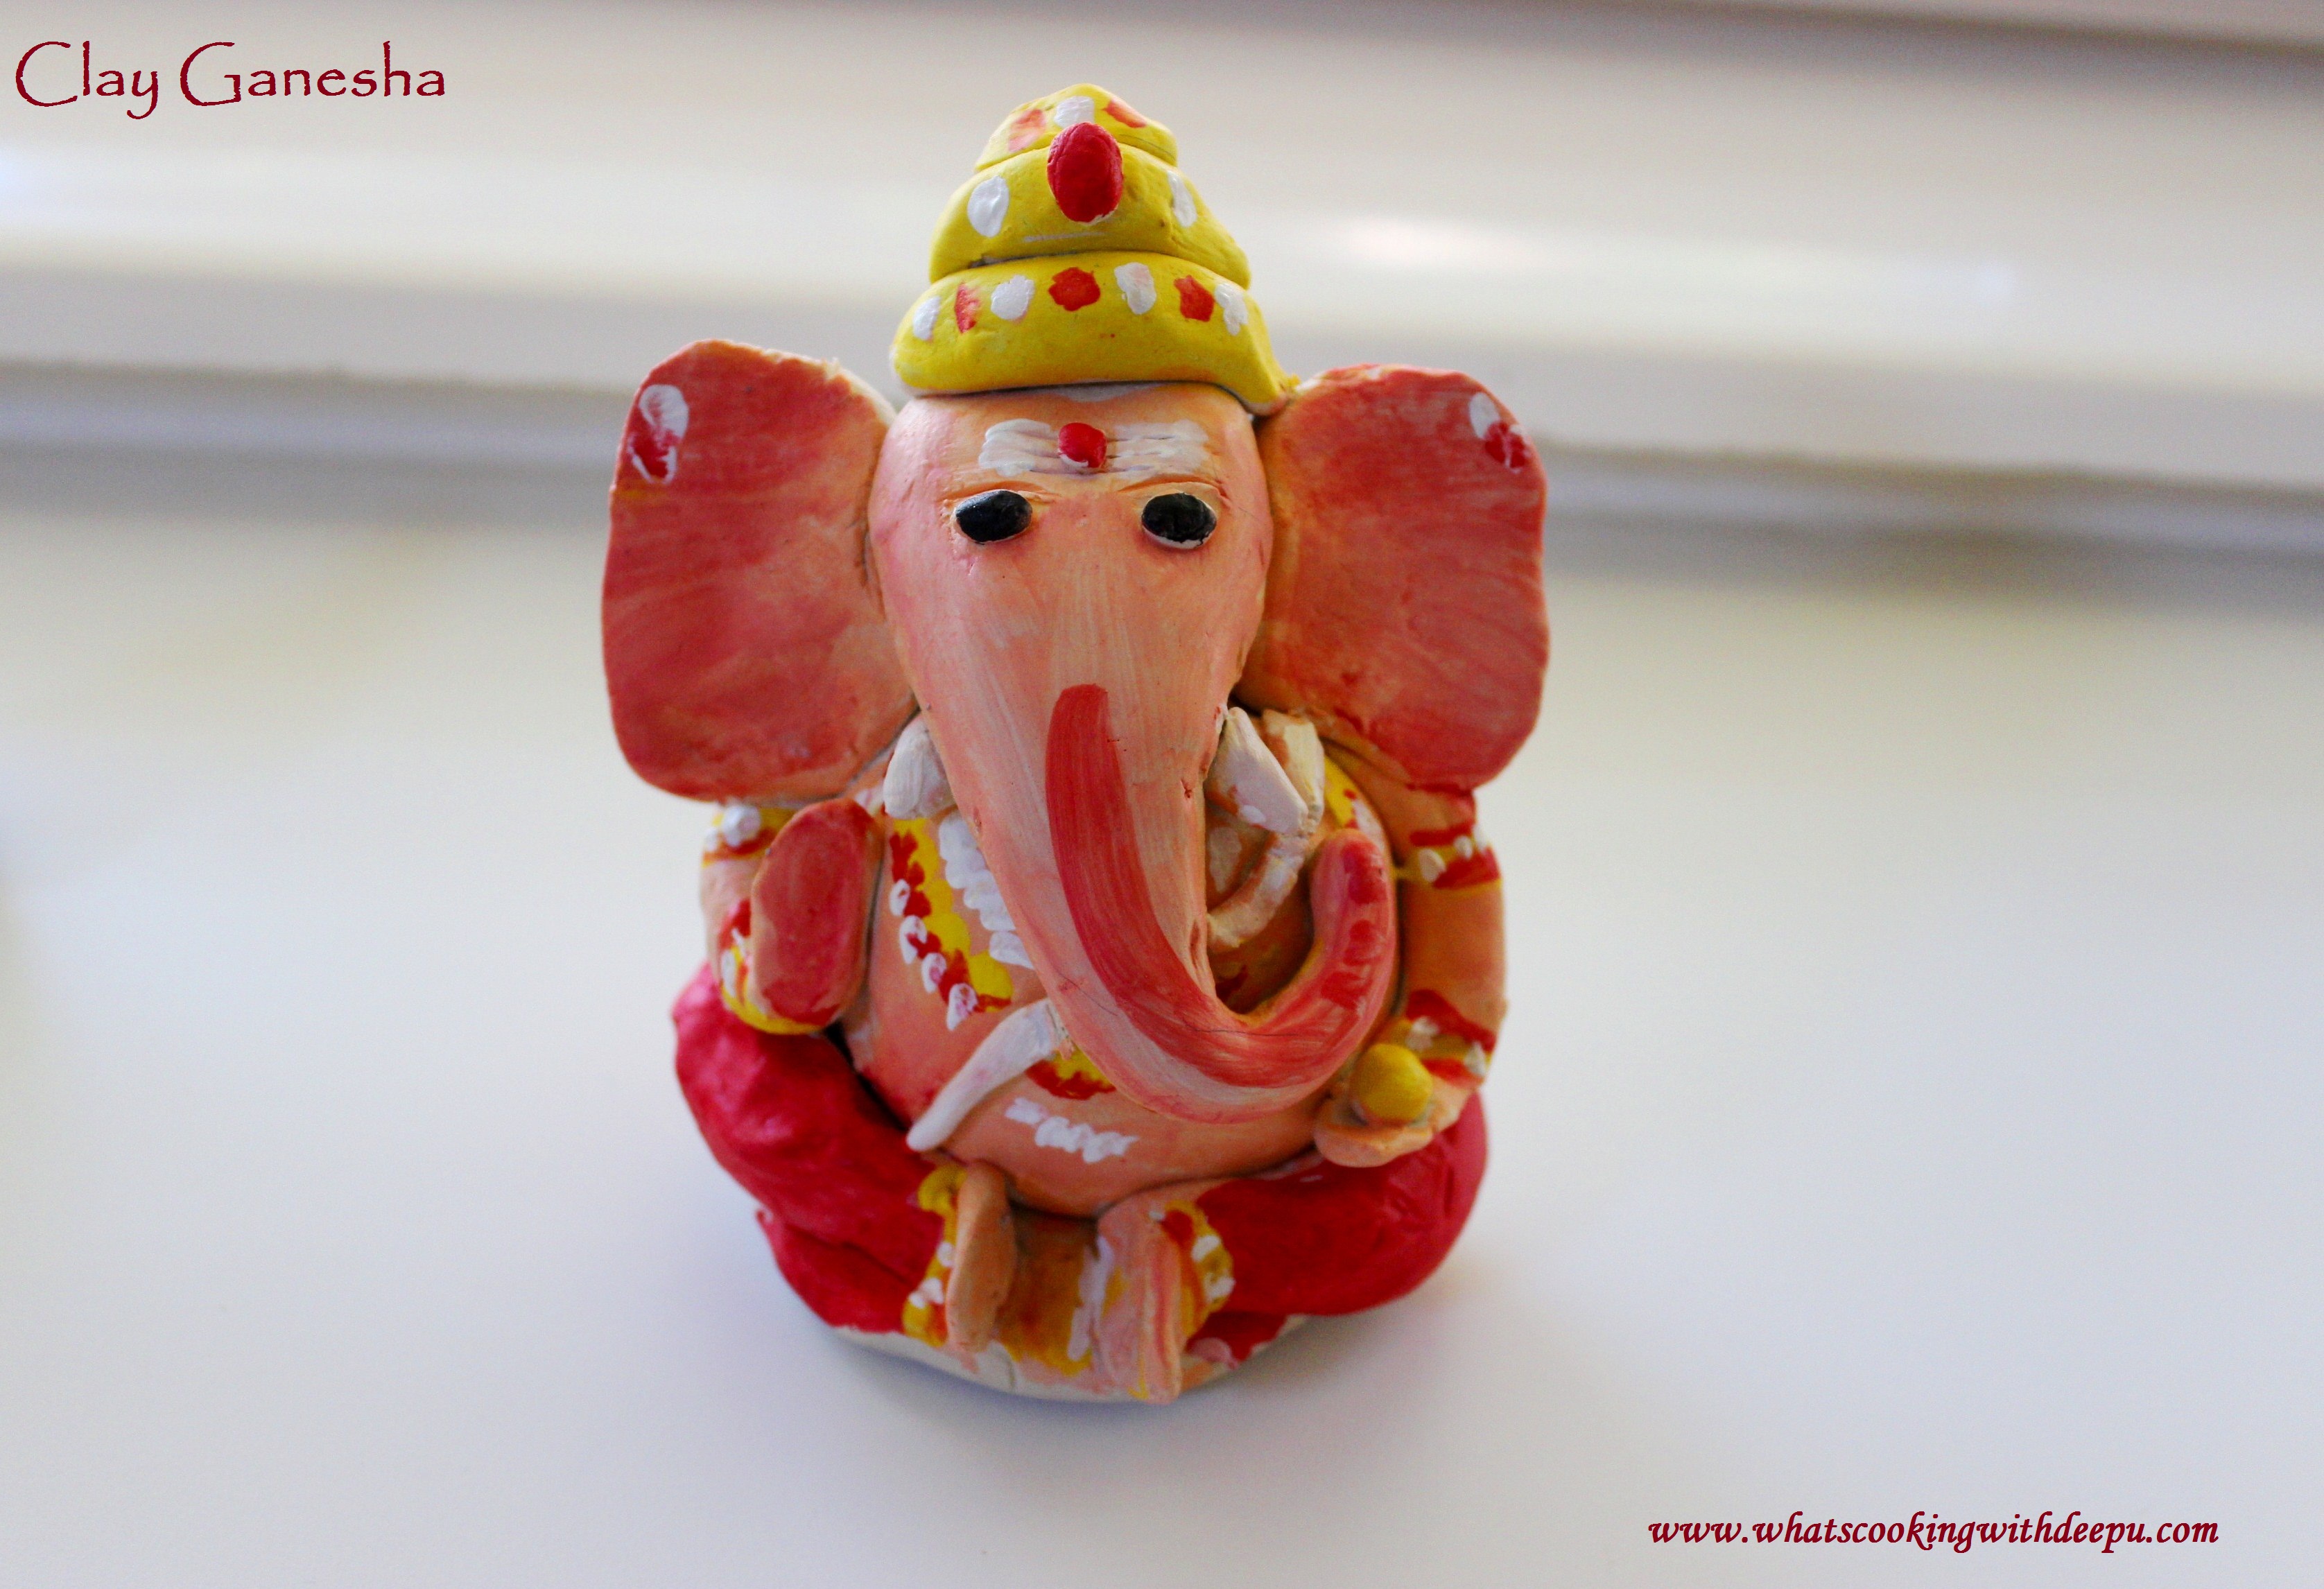 How to Make Clay Ganesha... - What's Cooking with Deepu